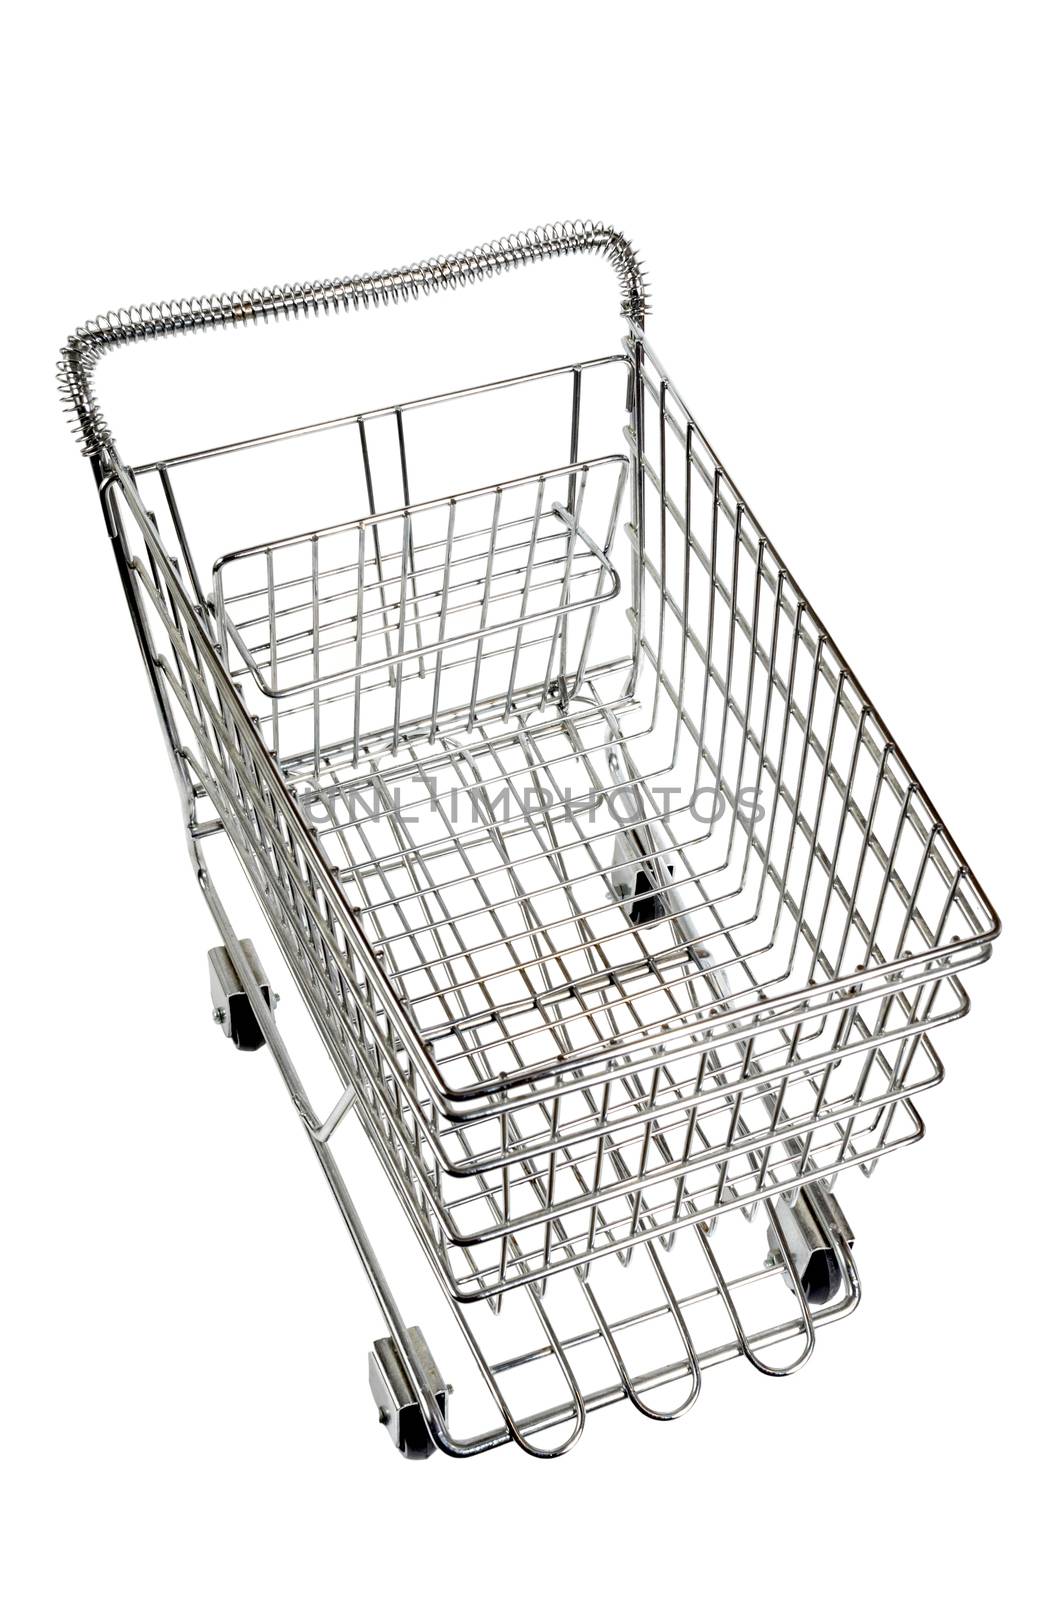 Shopping Cart Over View Isolated by stockbuster1